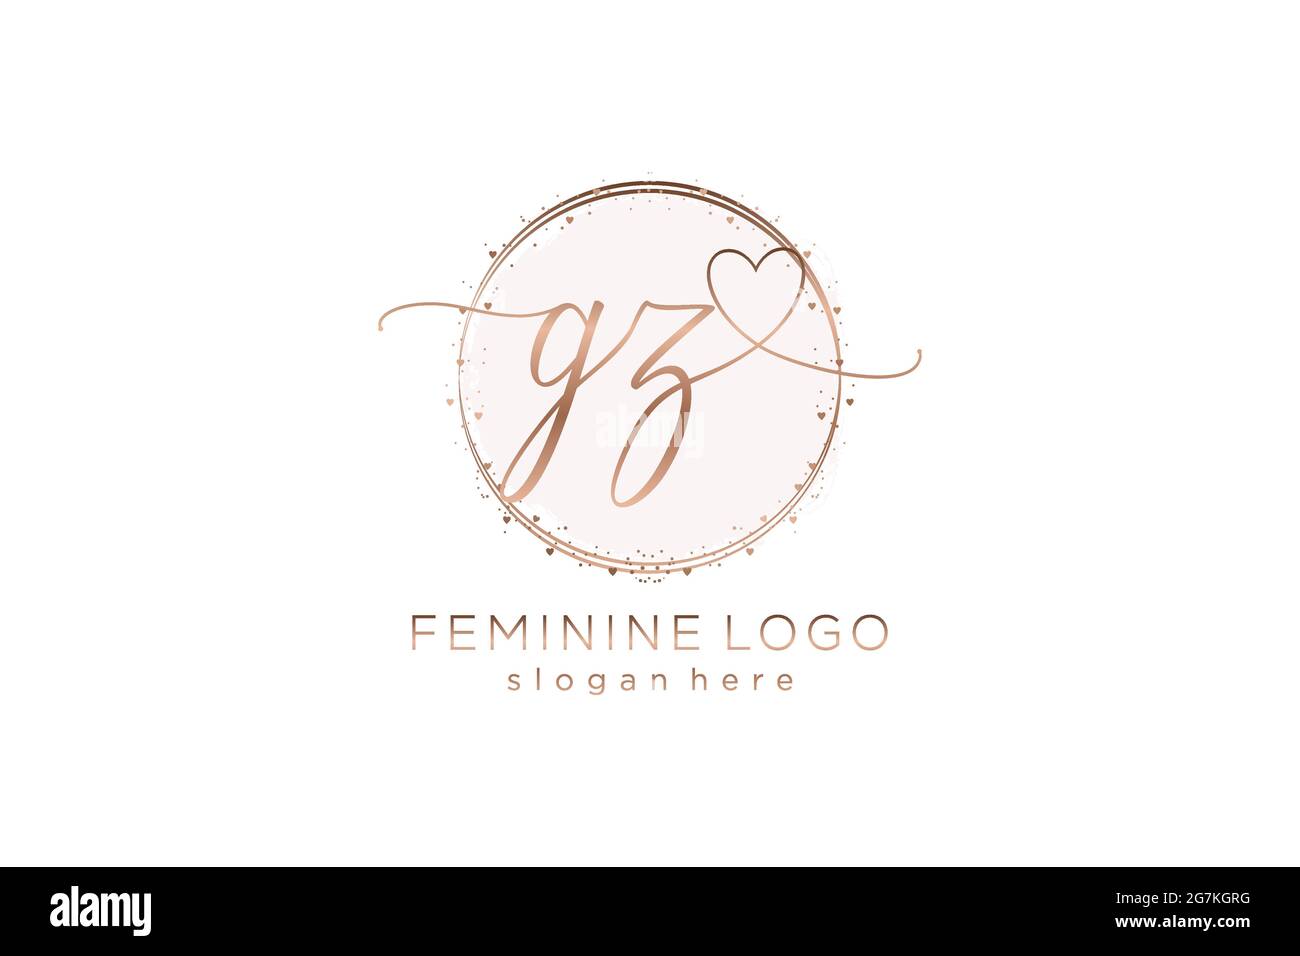 GZ handwriting logo with circle template vector logo of initial wedding, fashion, floral and botanical with creative template. Stock Vector